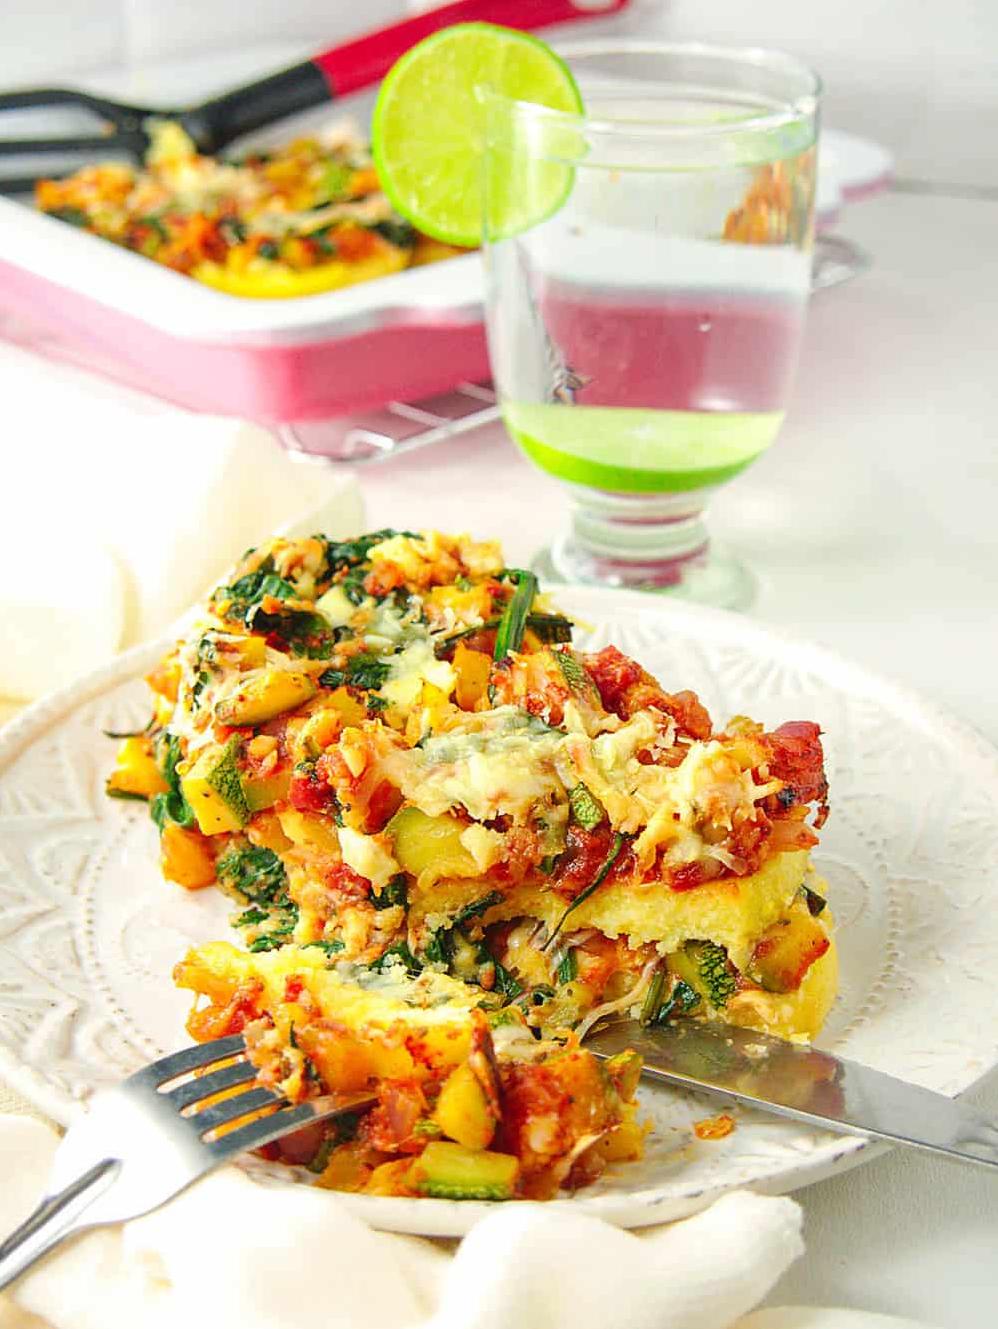  A colorful and gluten-free twist on a classic comfort food.